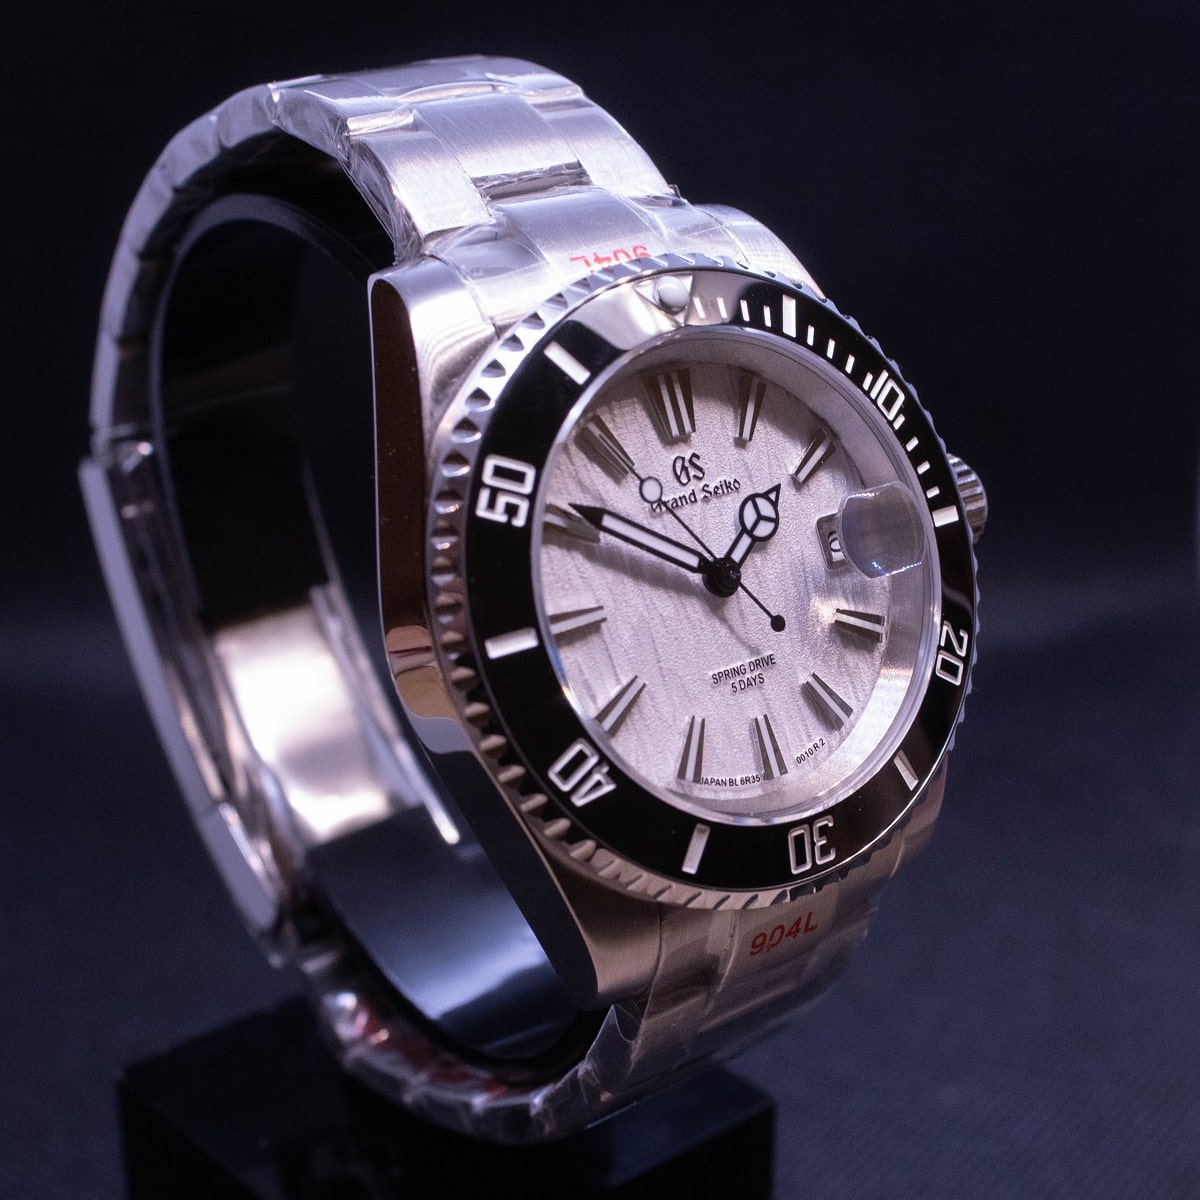 Grand Seiko Submariner MOD 380 USD - Express Delivery included